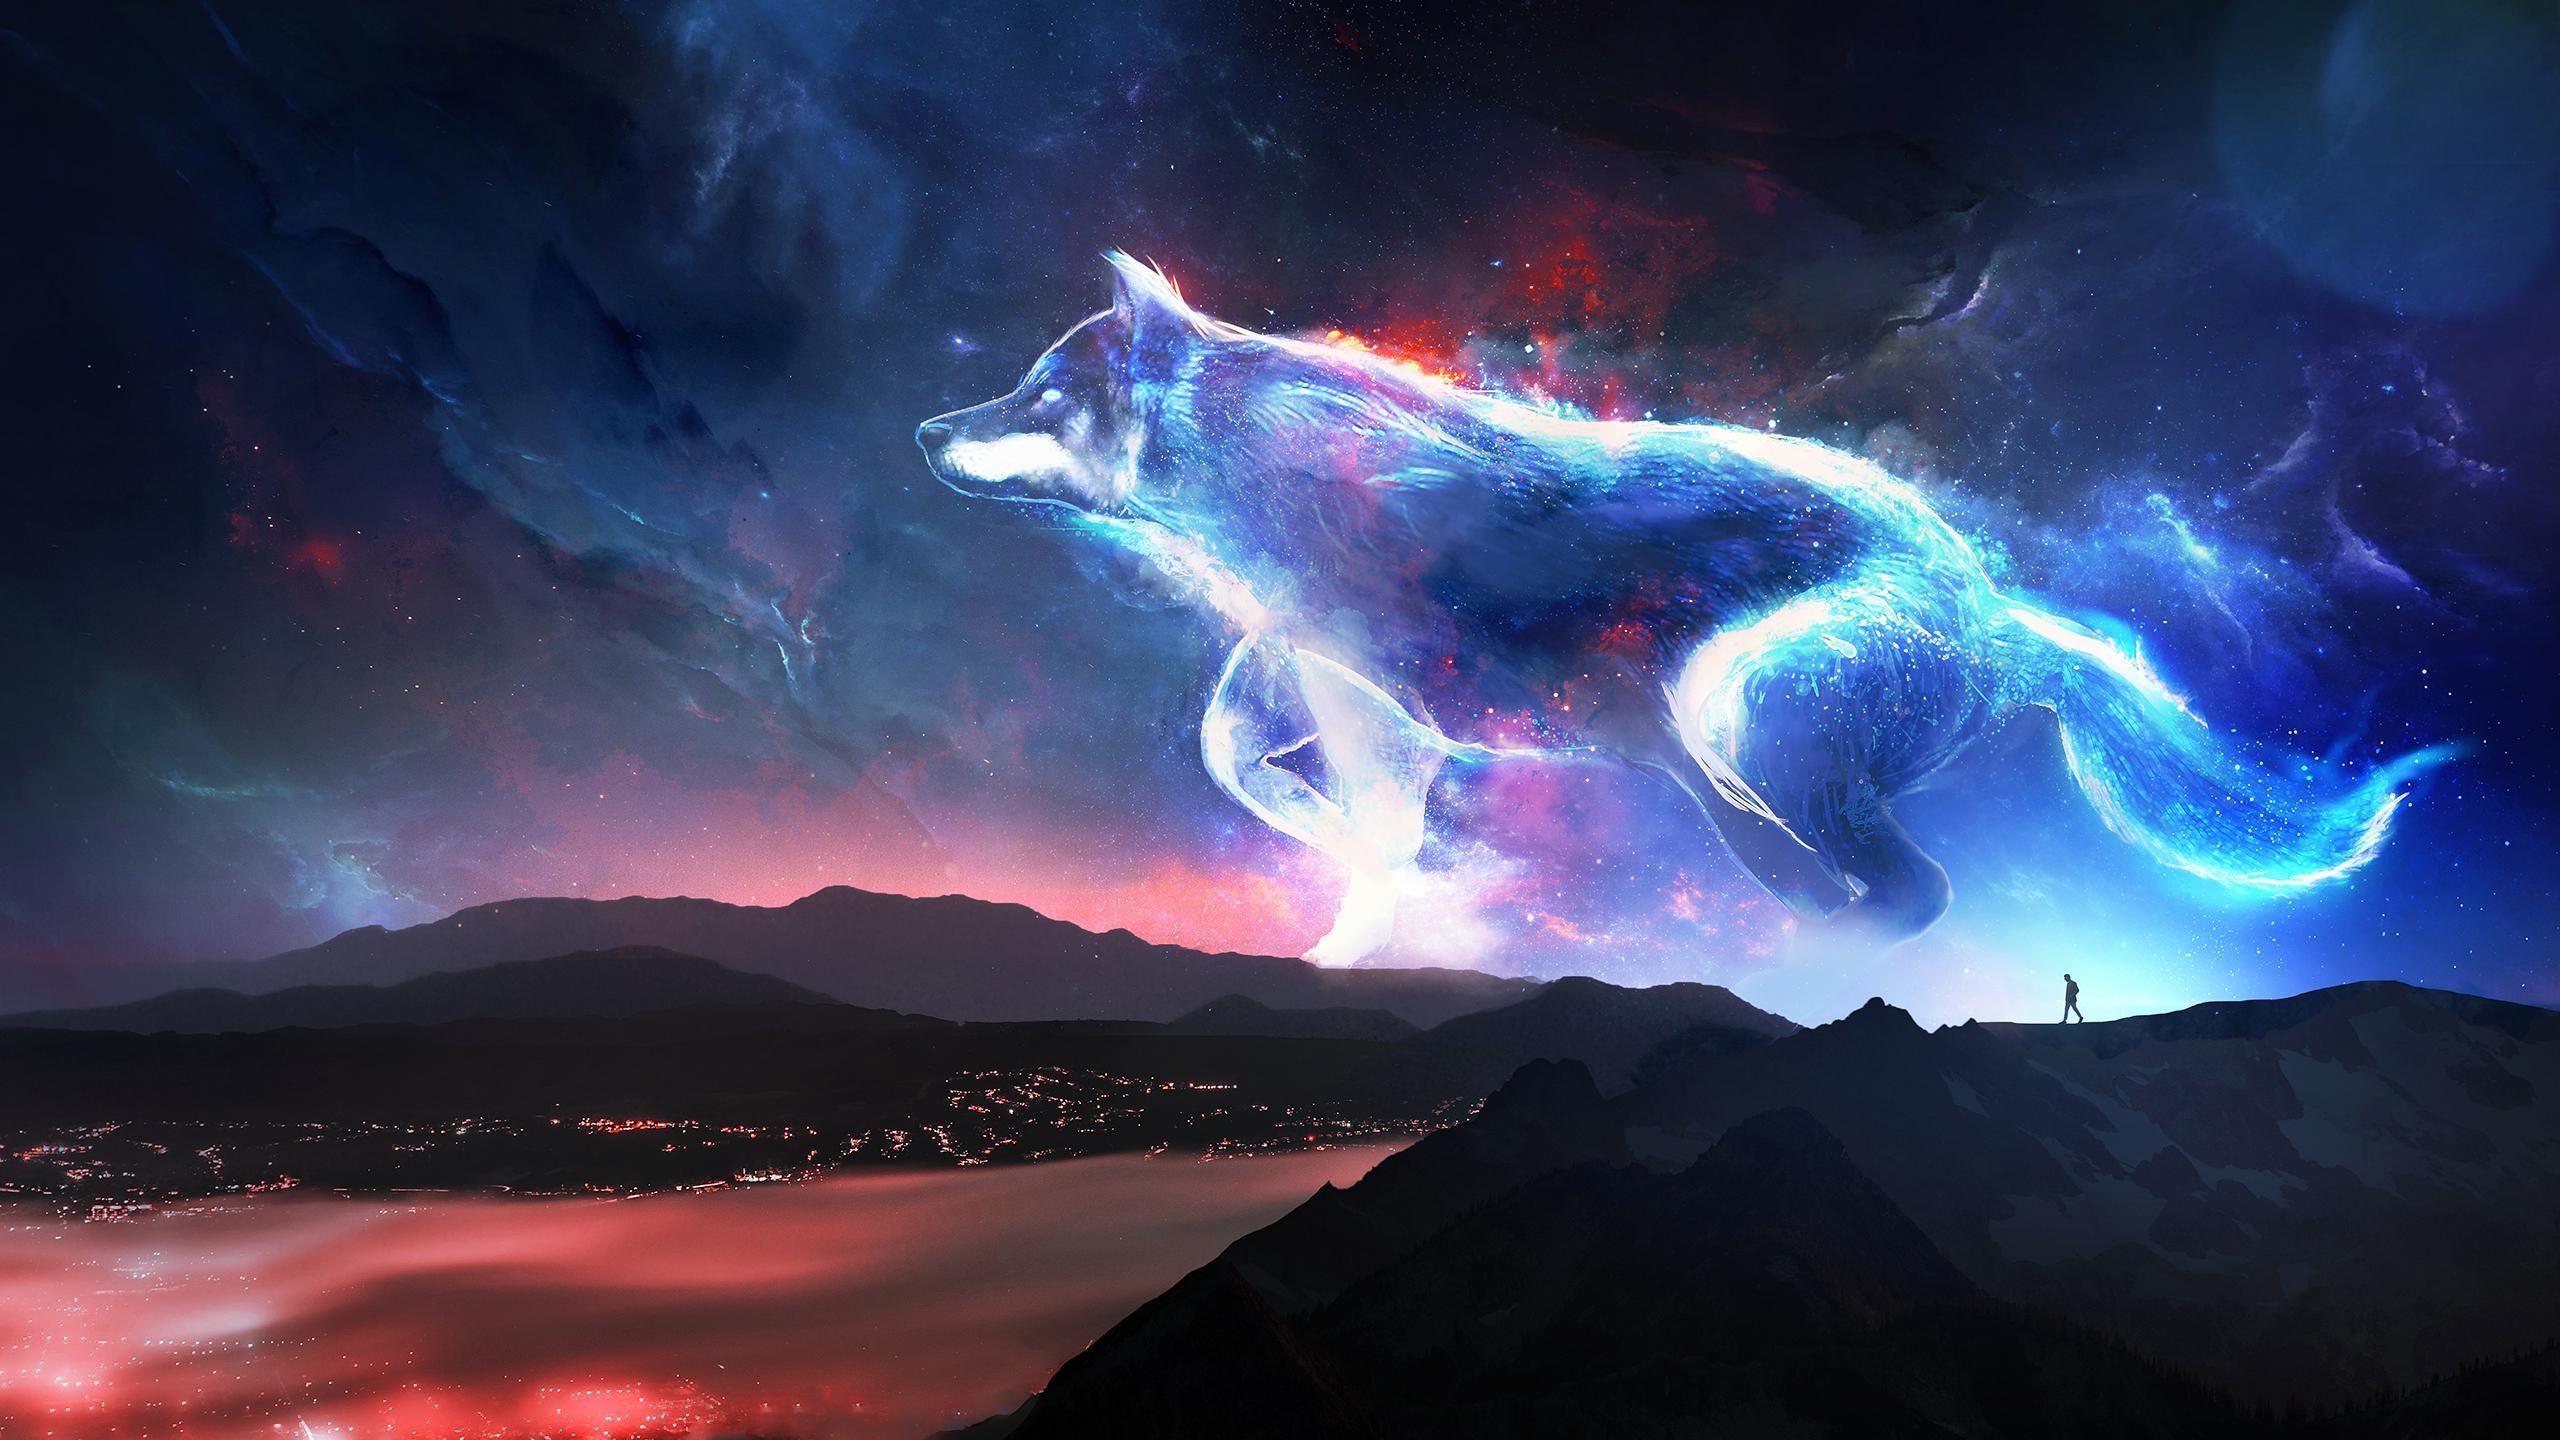 Night Wolf Wallpapers - Wallpaper Cave